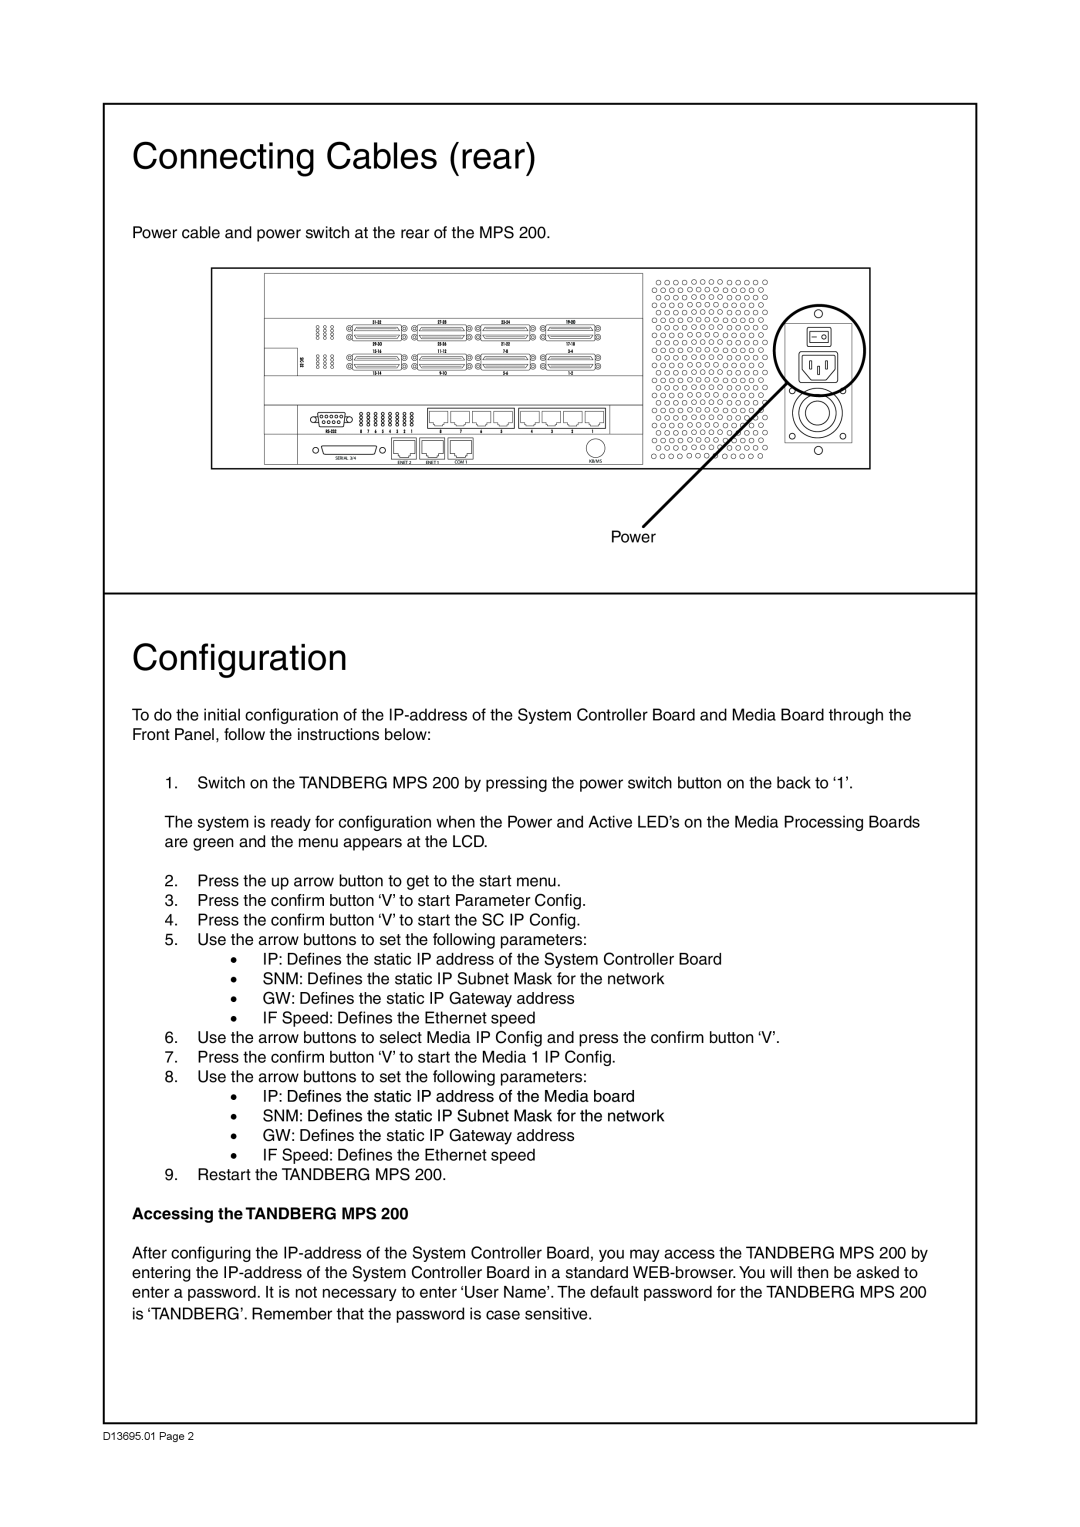 TANDBERG MPS 200 user manual Connecting Cables rear, Configuration, Accessing the TANDBERG MPS 